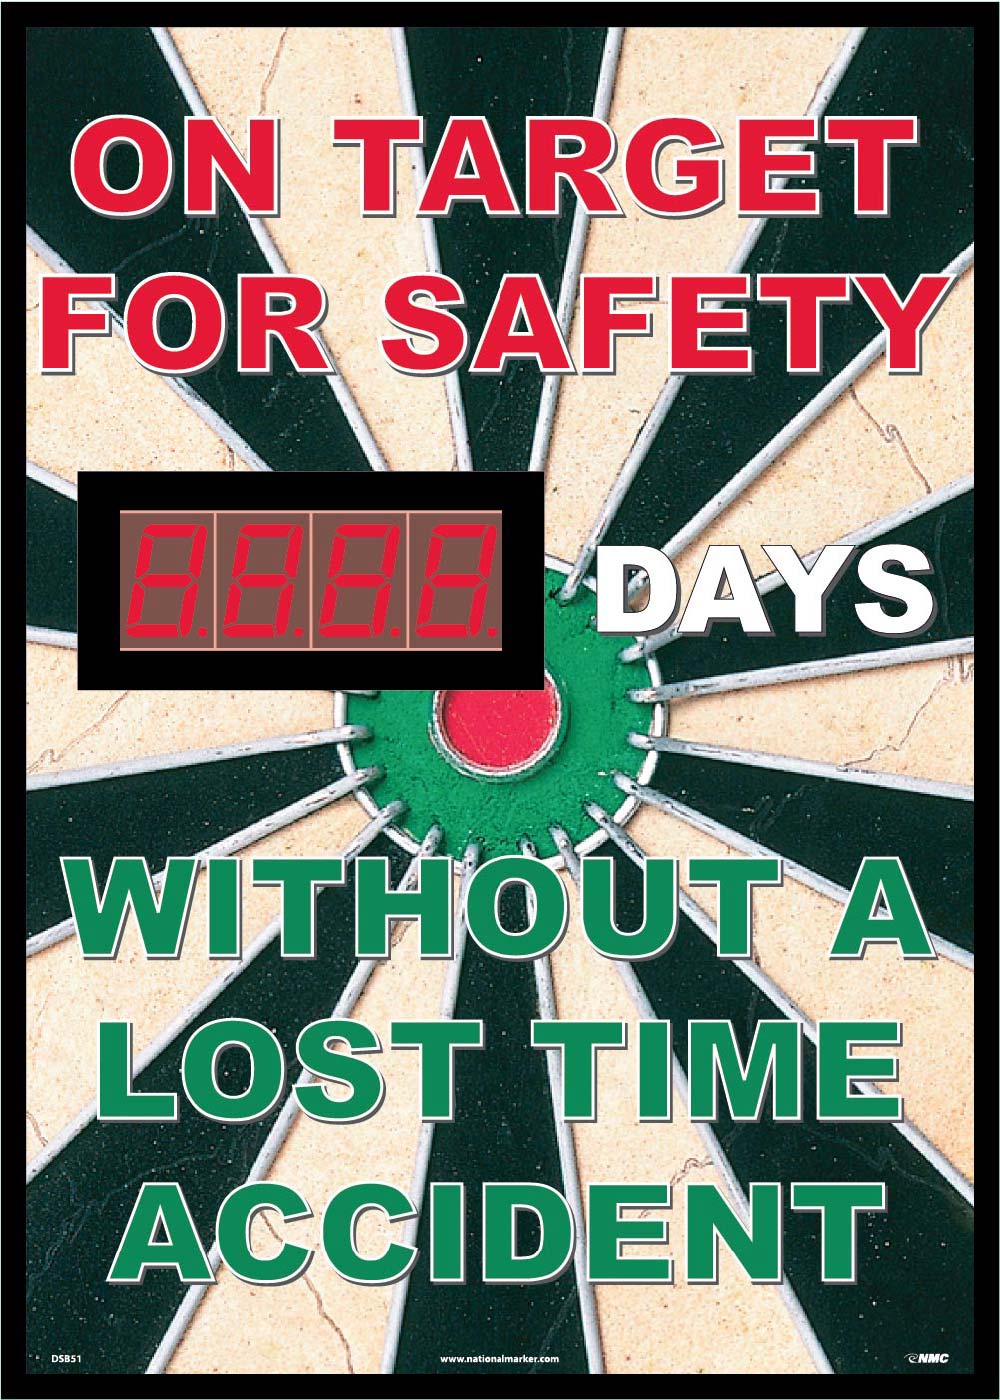 On Target For Safety Days Without A Lost Time Accident Scoreboard-eSafety Supplies, Inc